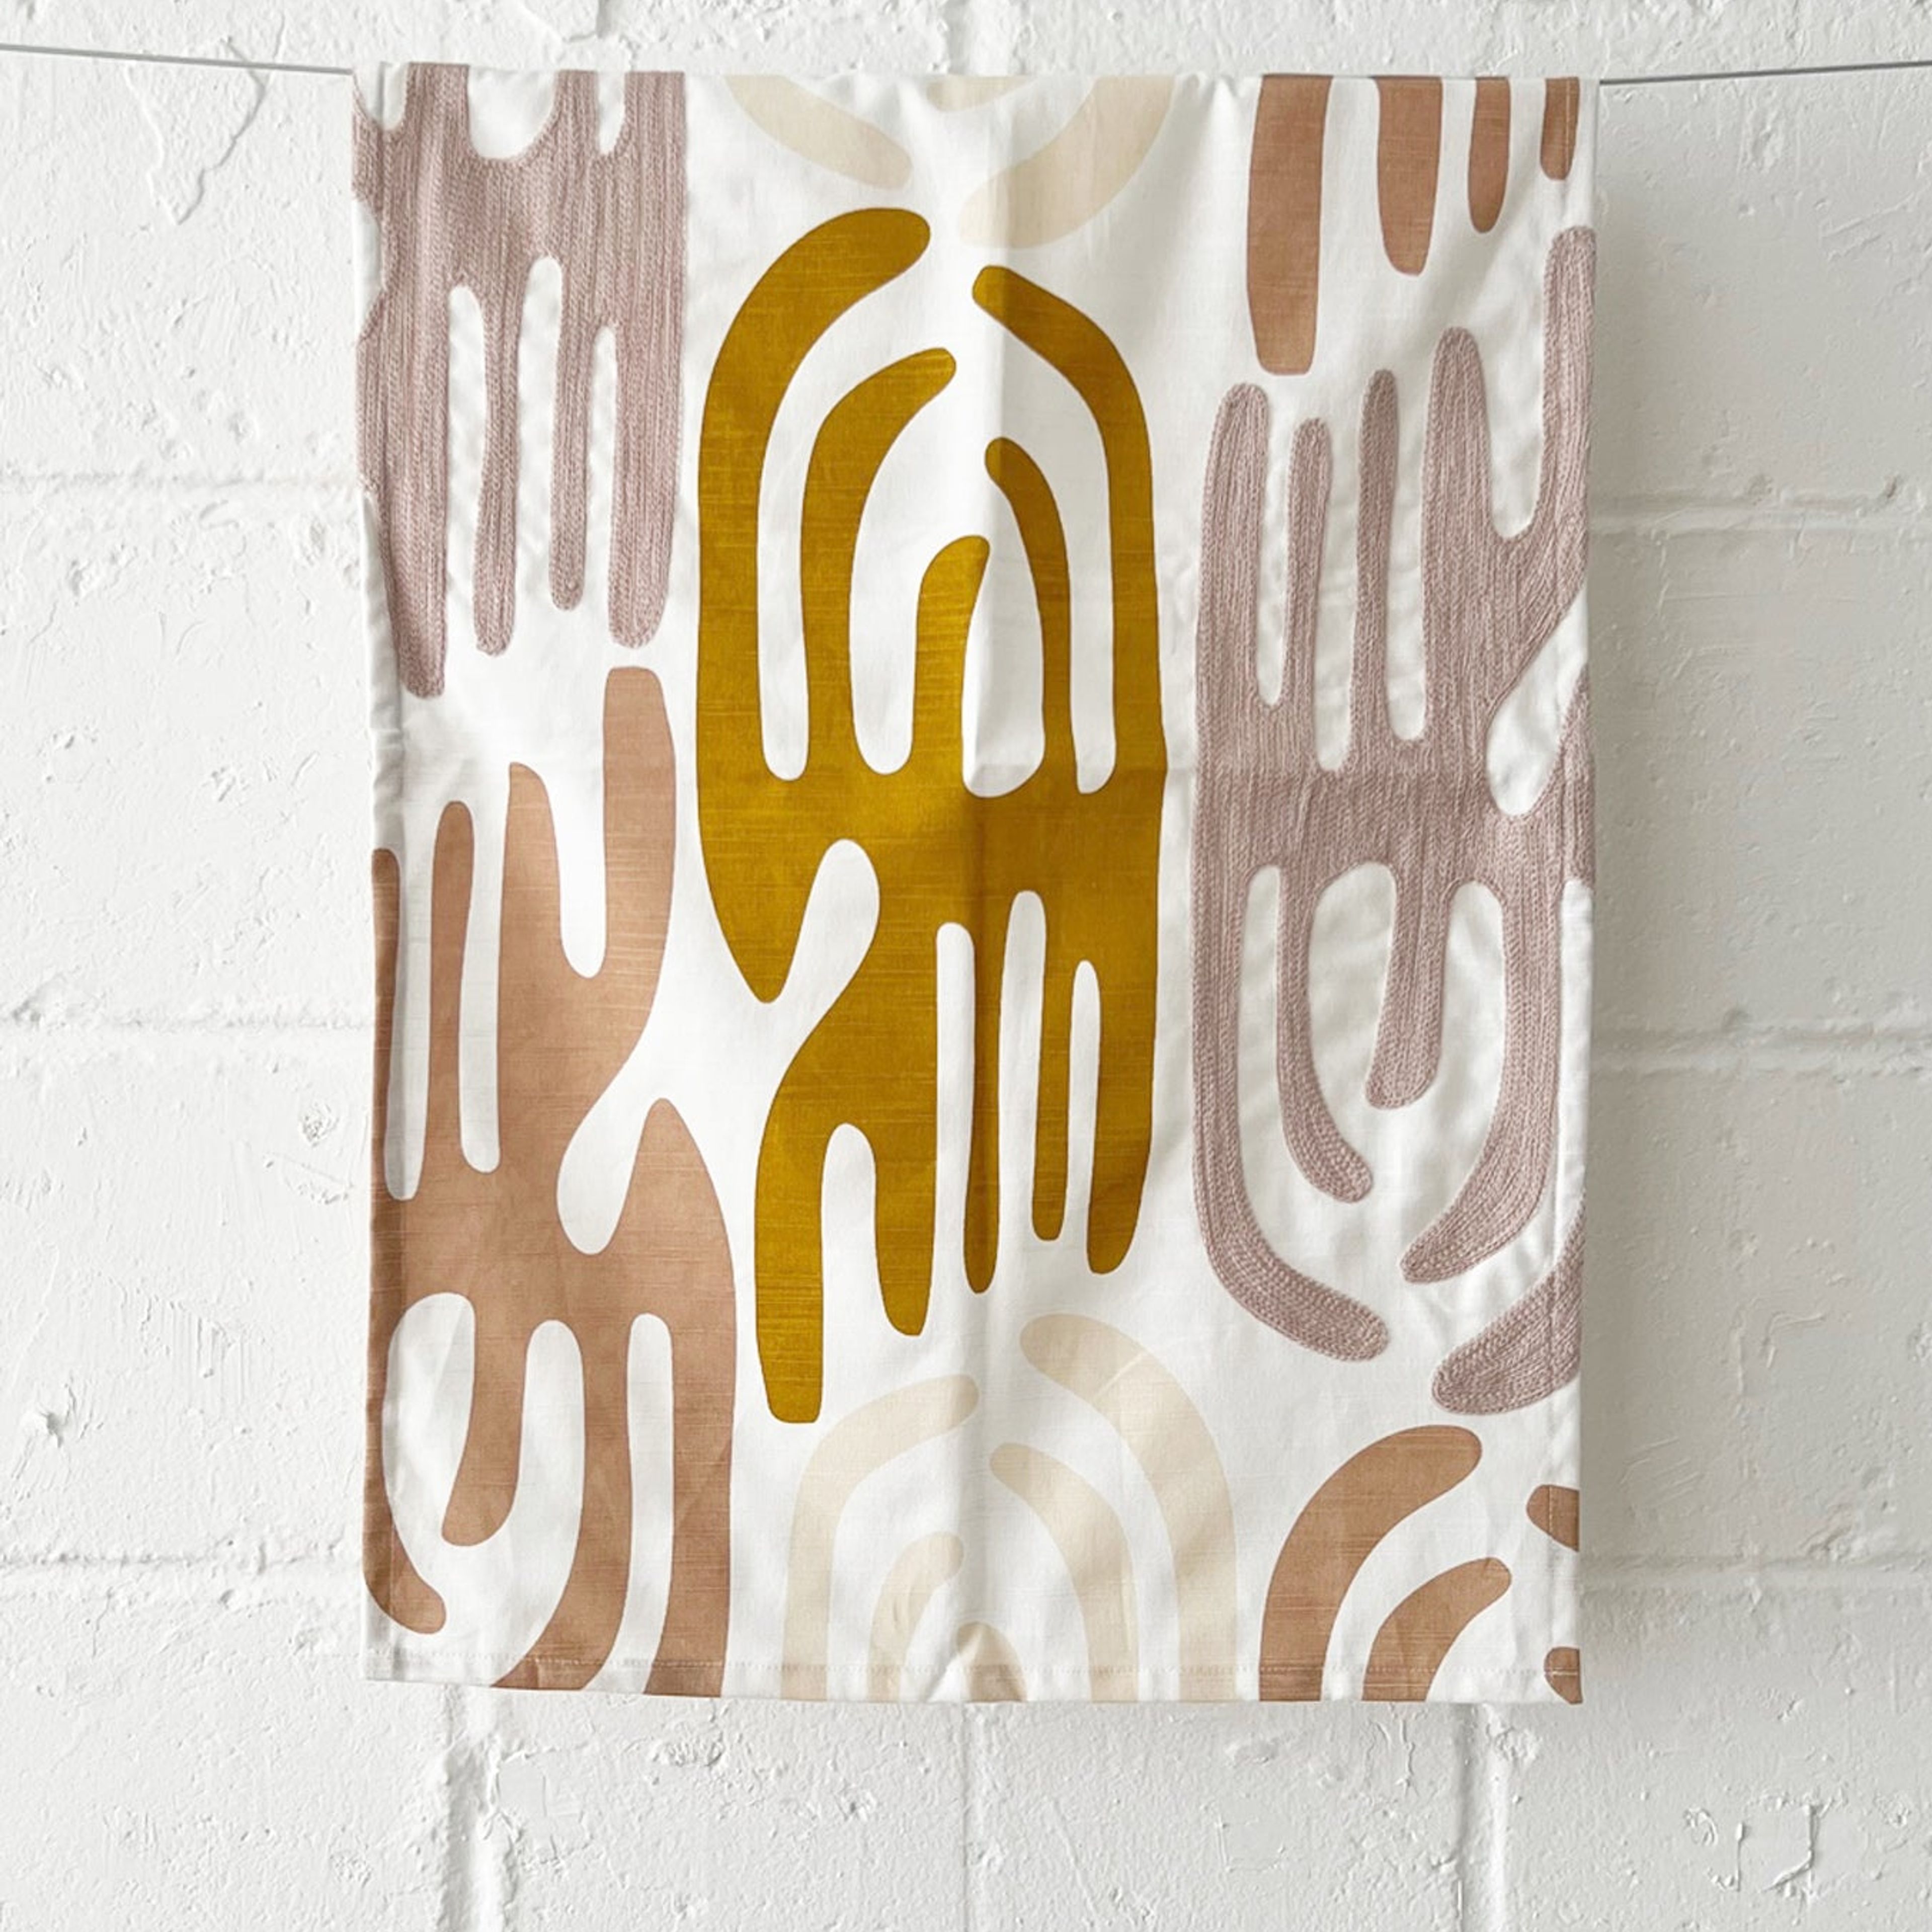 Textured Tea Towel - Dripping (embroidered)